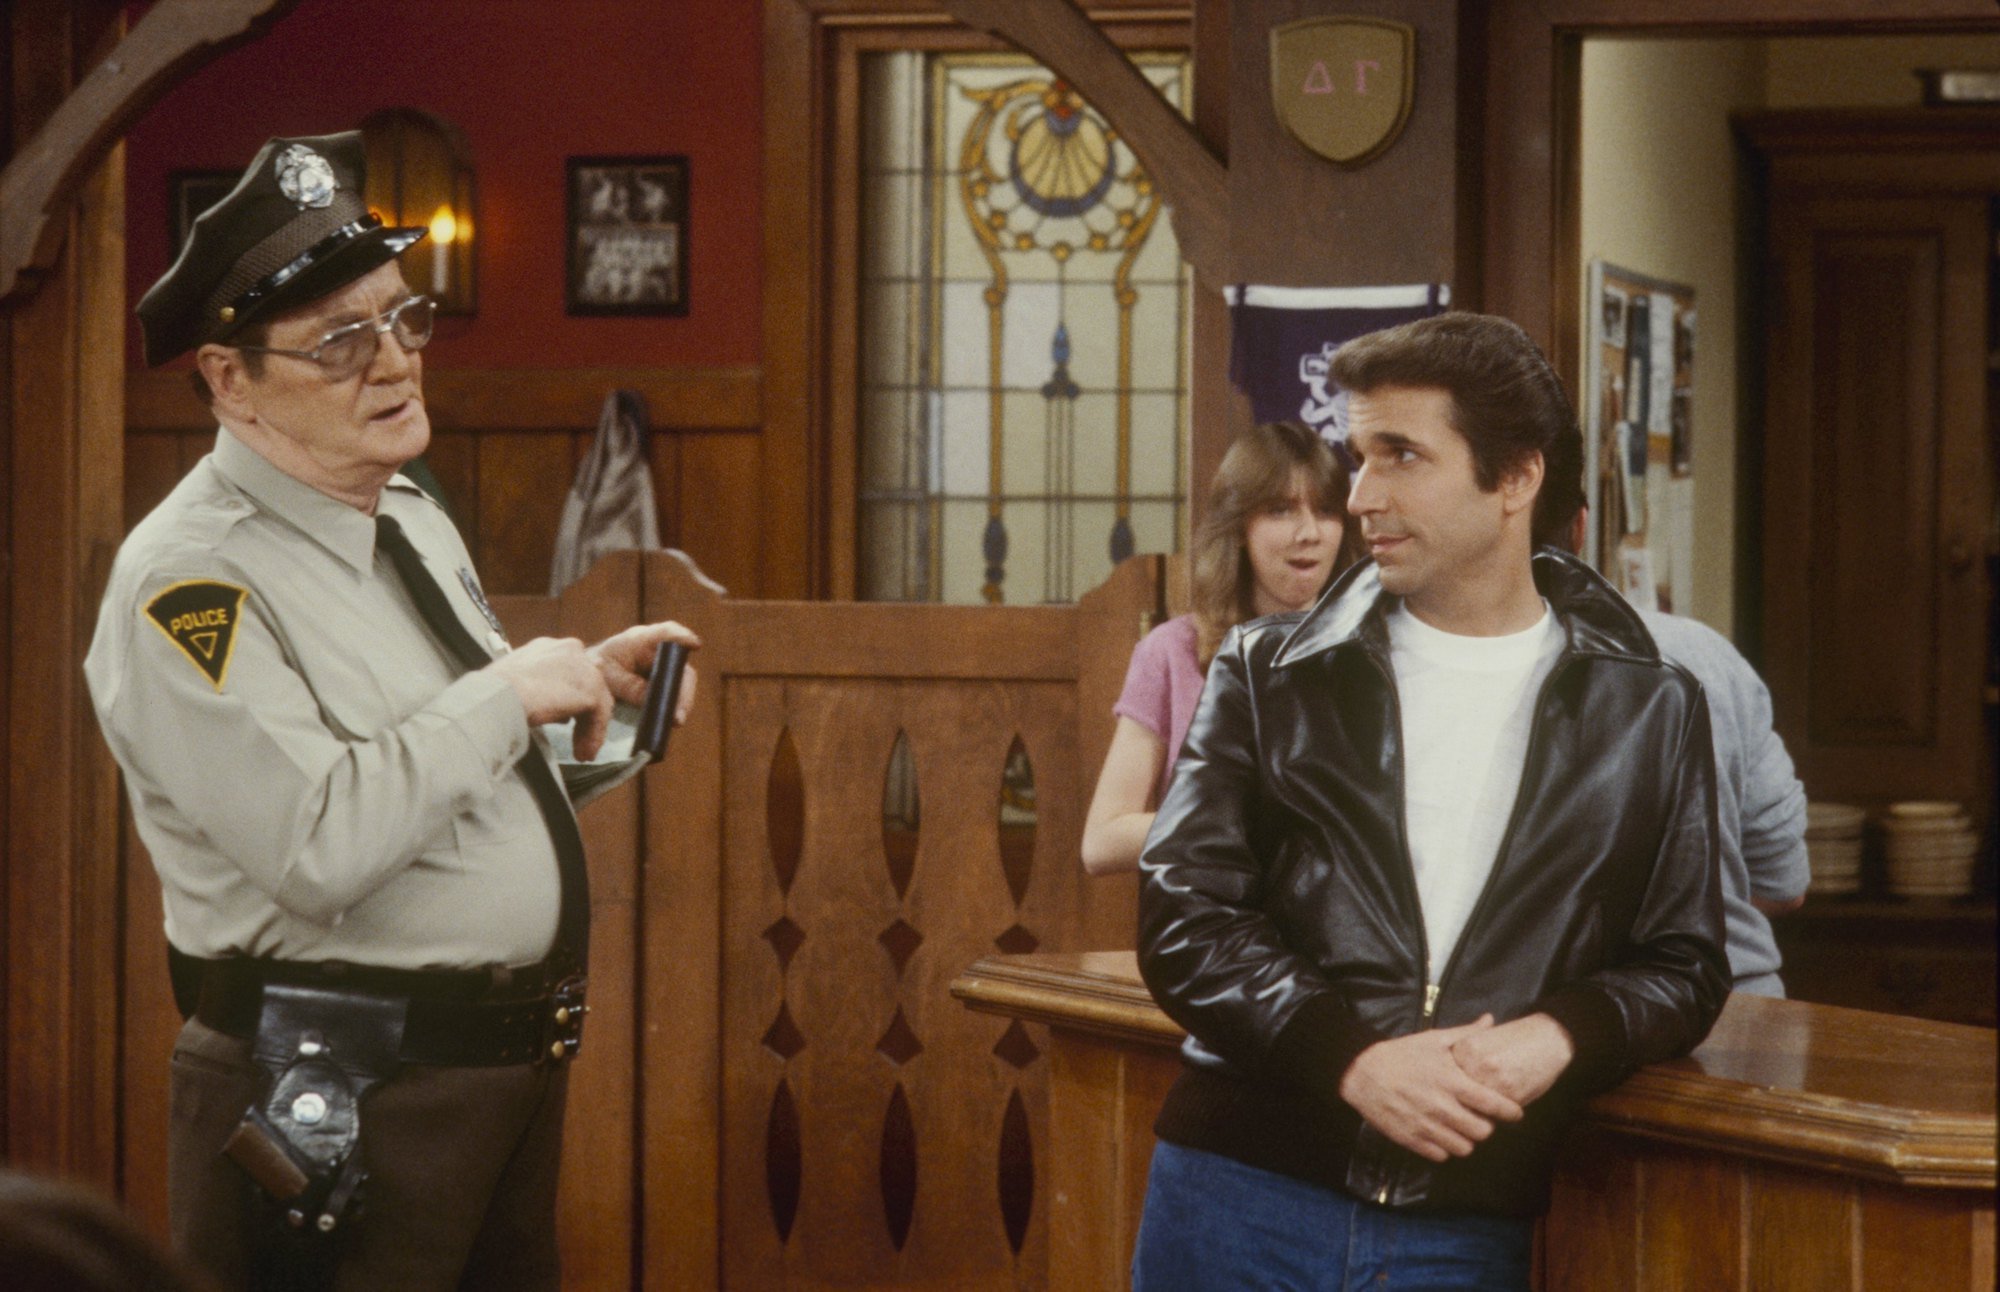 (L-R) Ed Peck and Henry Winkler on set of 'Happy Days'